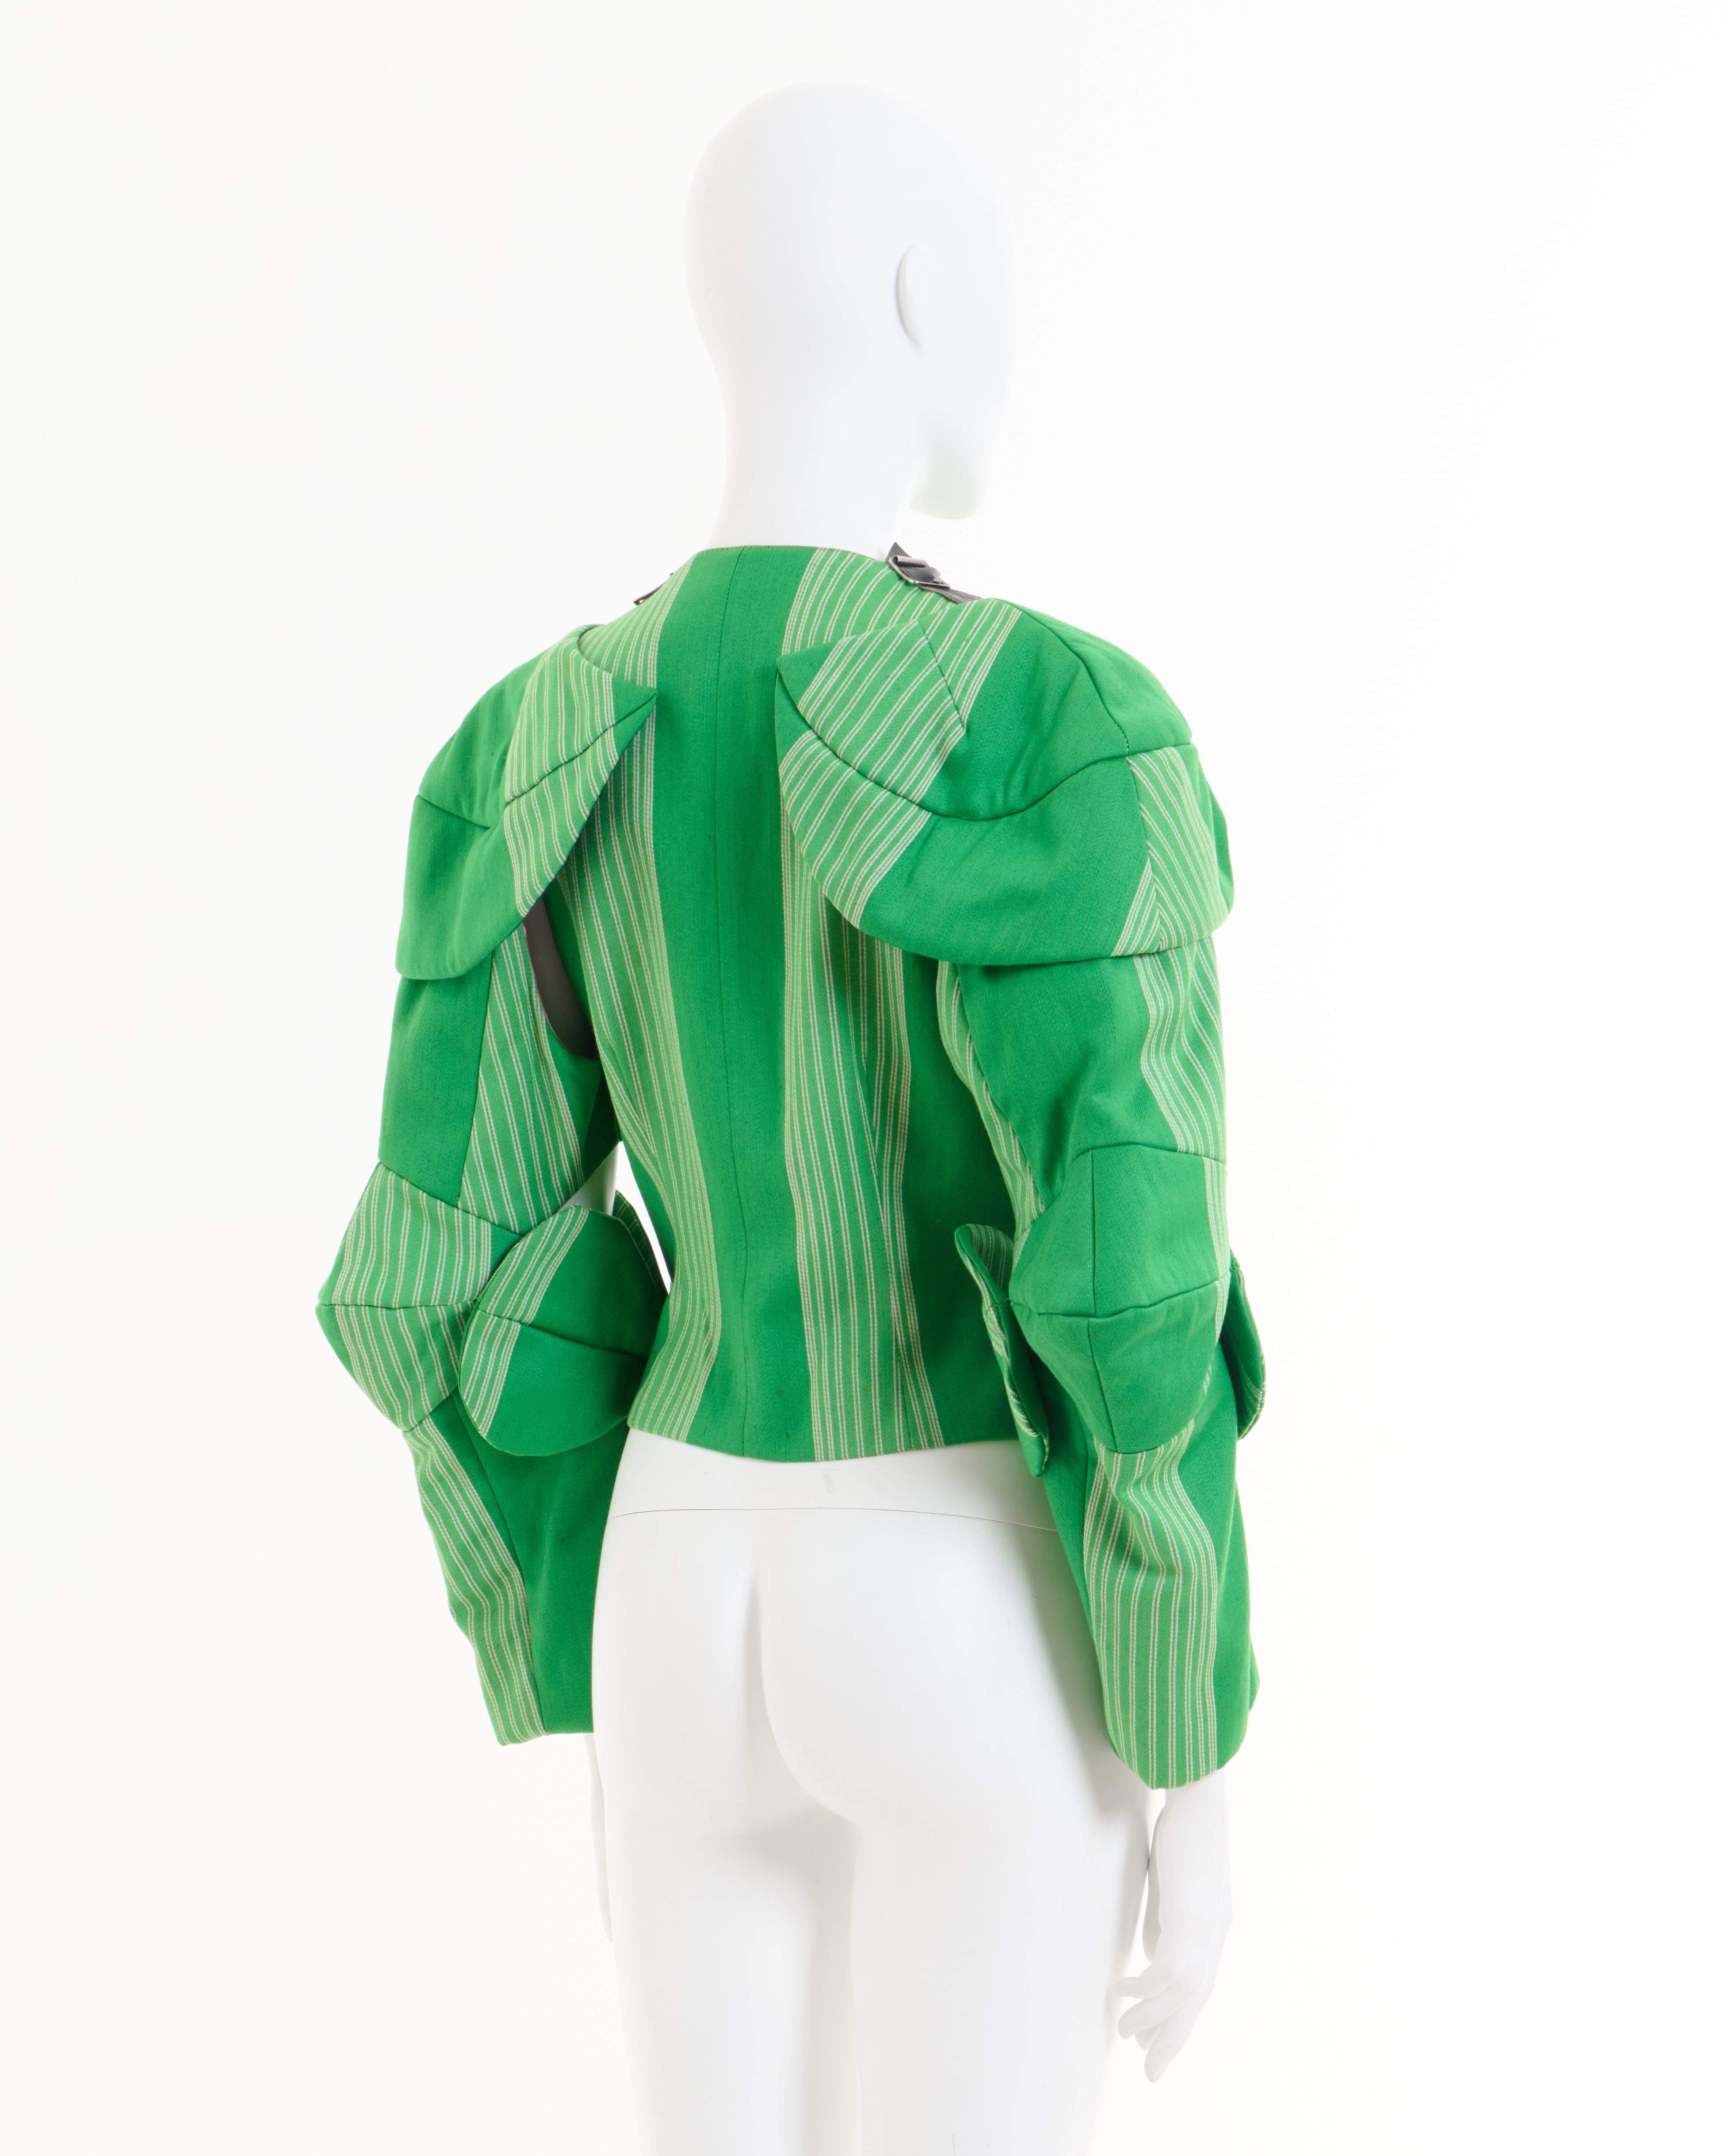 Vivienne Westwood  F/W 1988/89 ‘Time Machine’ Green striped Armour jacket For Sale 1